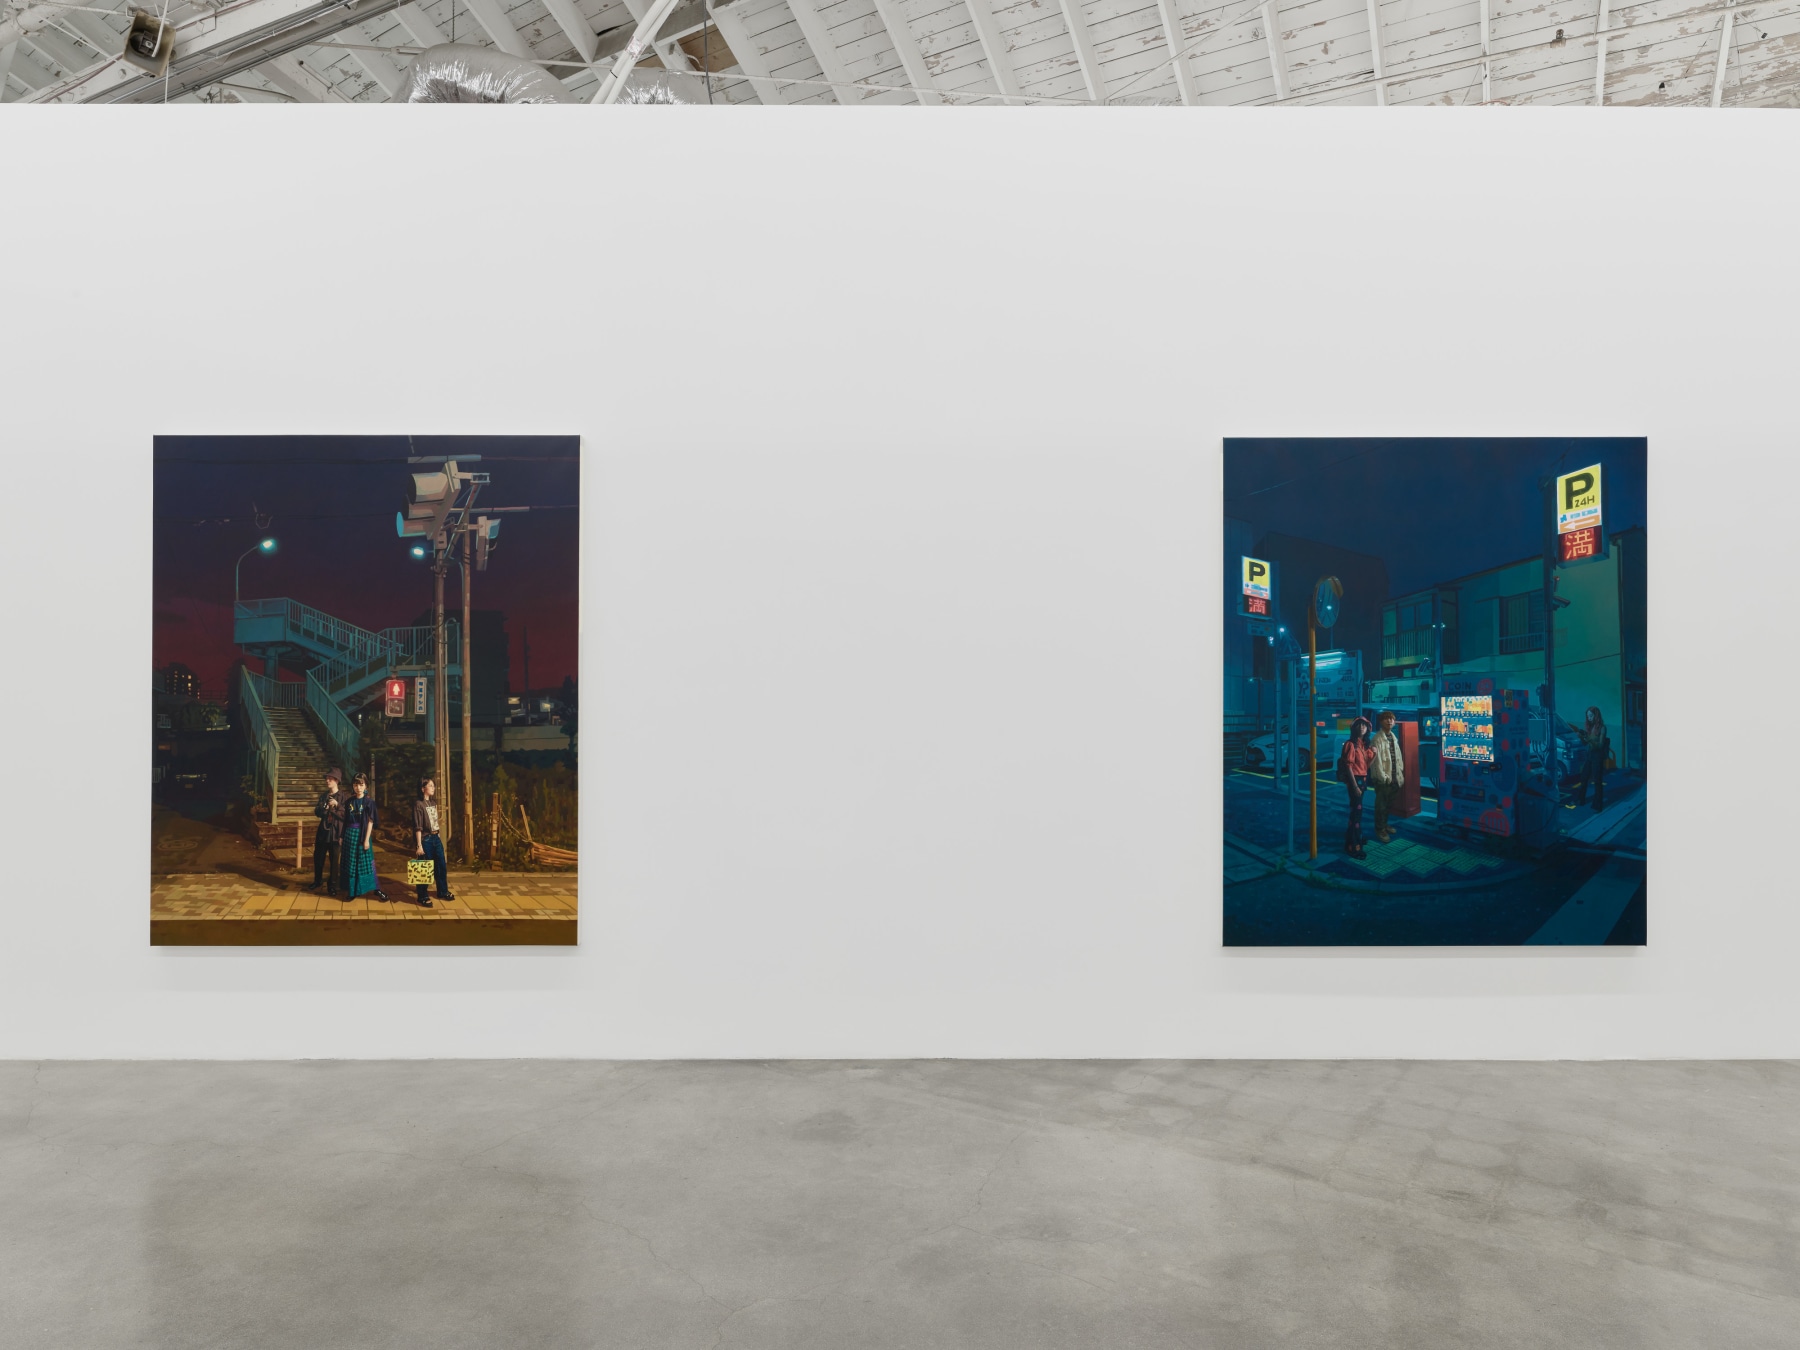 Installation view of Keita Morimoto's "as we didn't know it" at Night Gallery. 